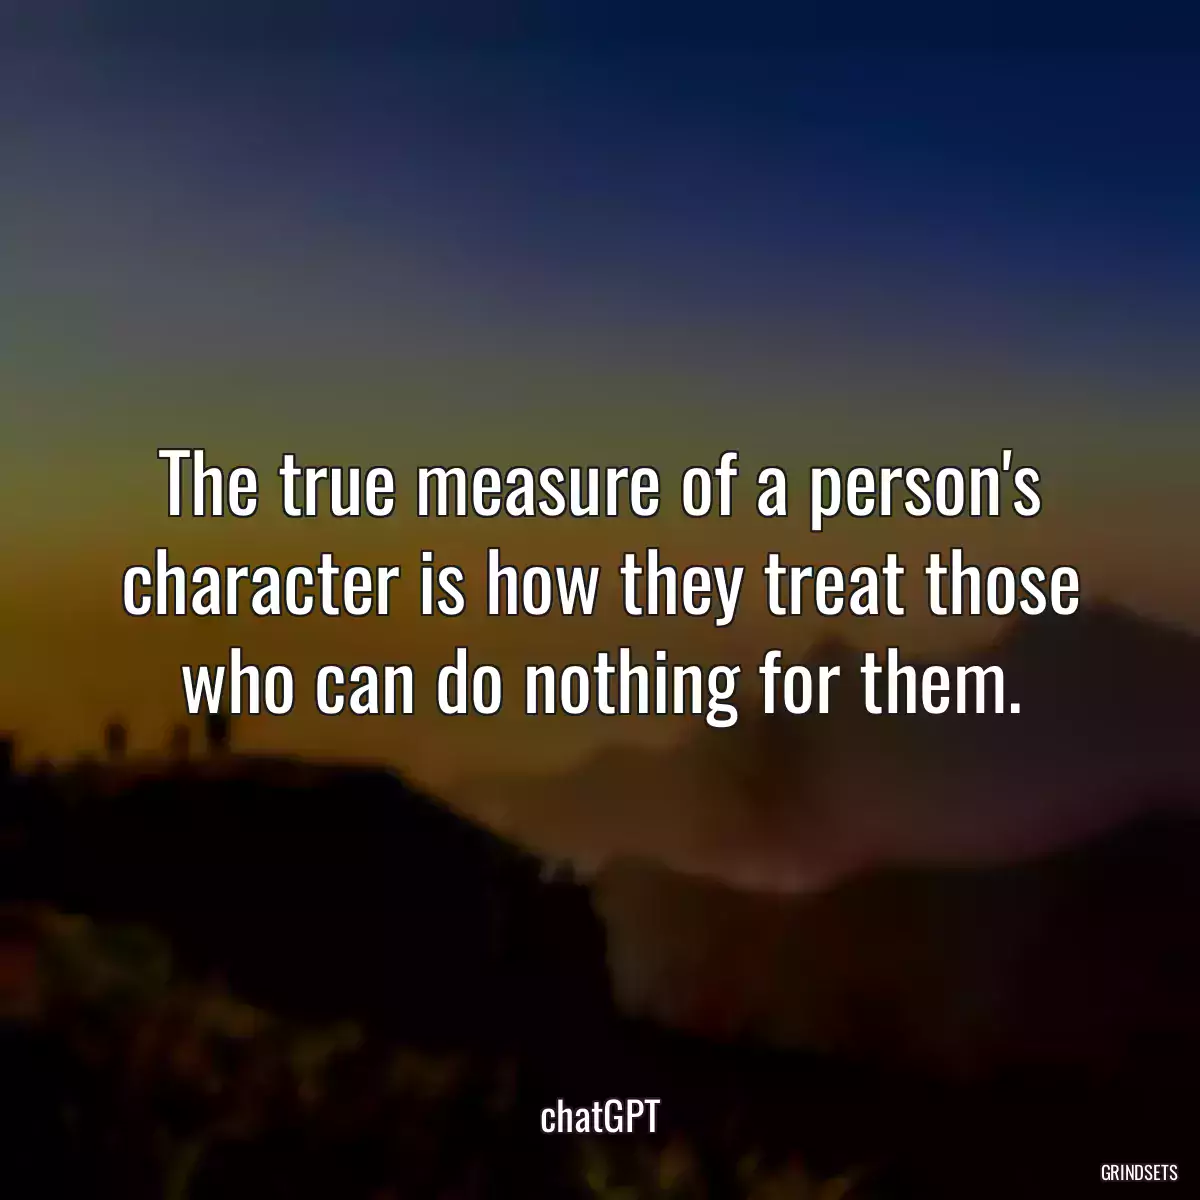 The true measure of a person\'s character is how they treat those who can do nothing for them.